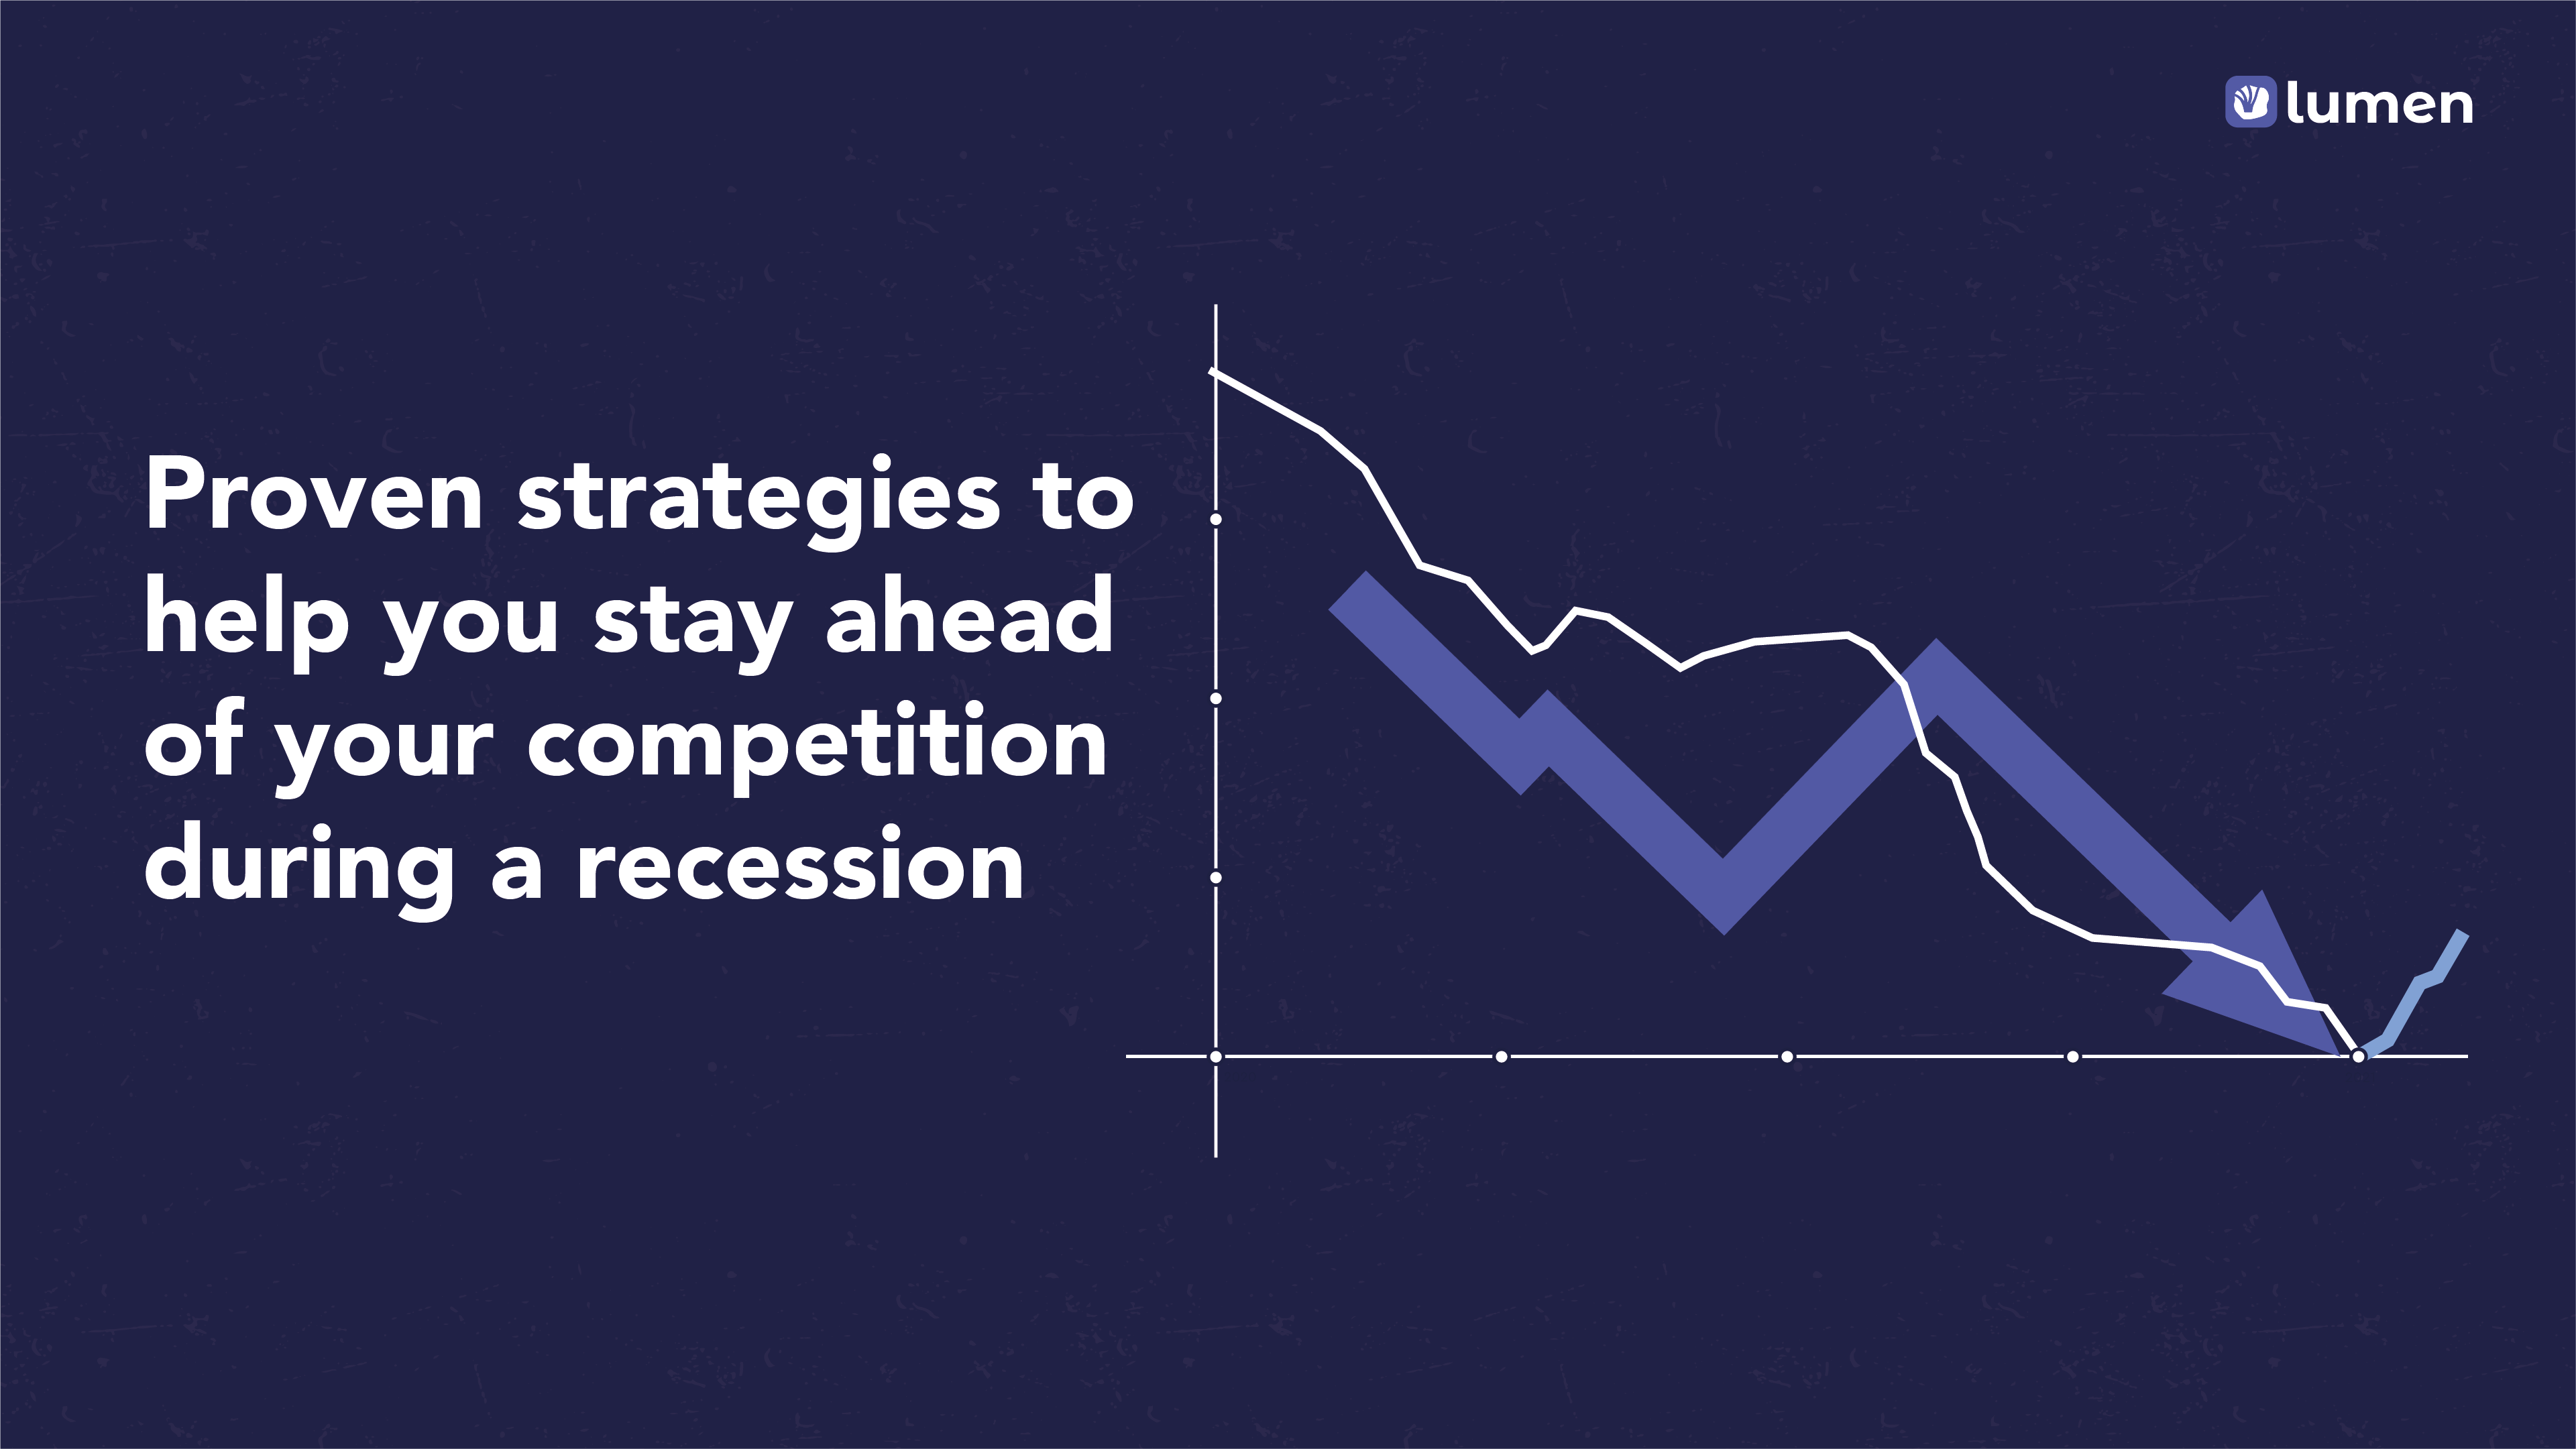 8 Proven strategies to help you stay ahead of your competition during a recession.